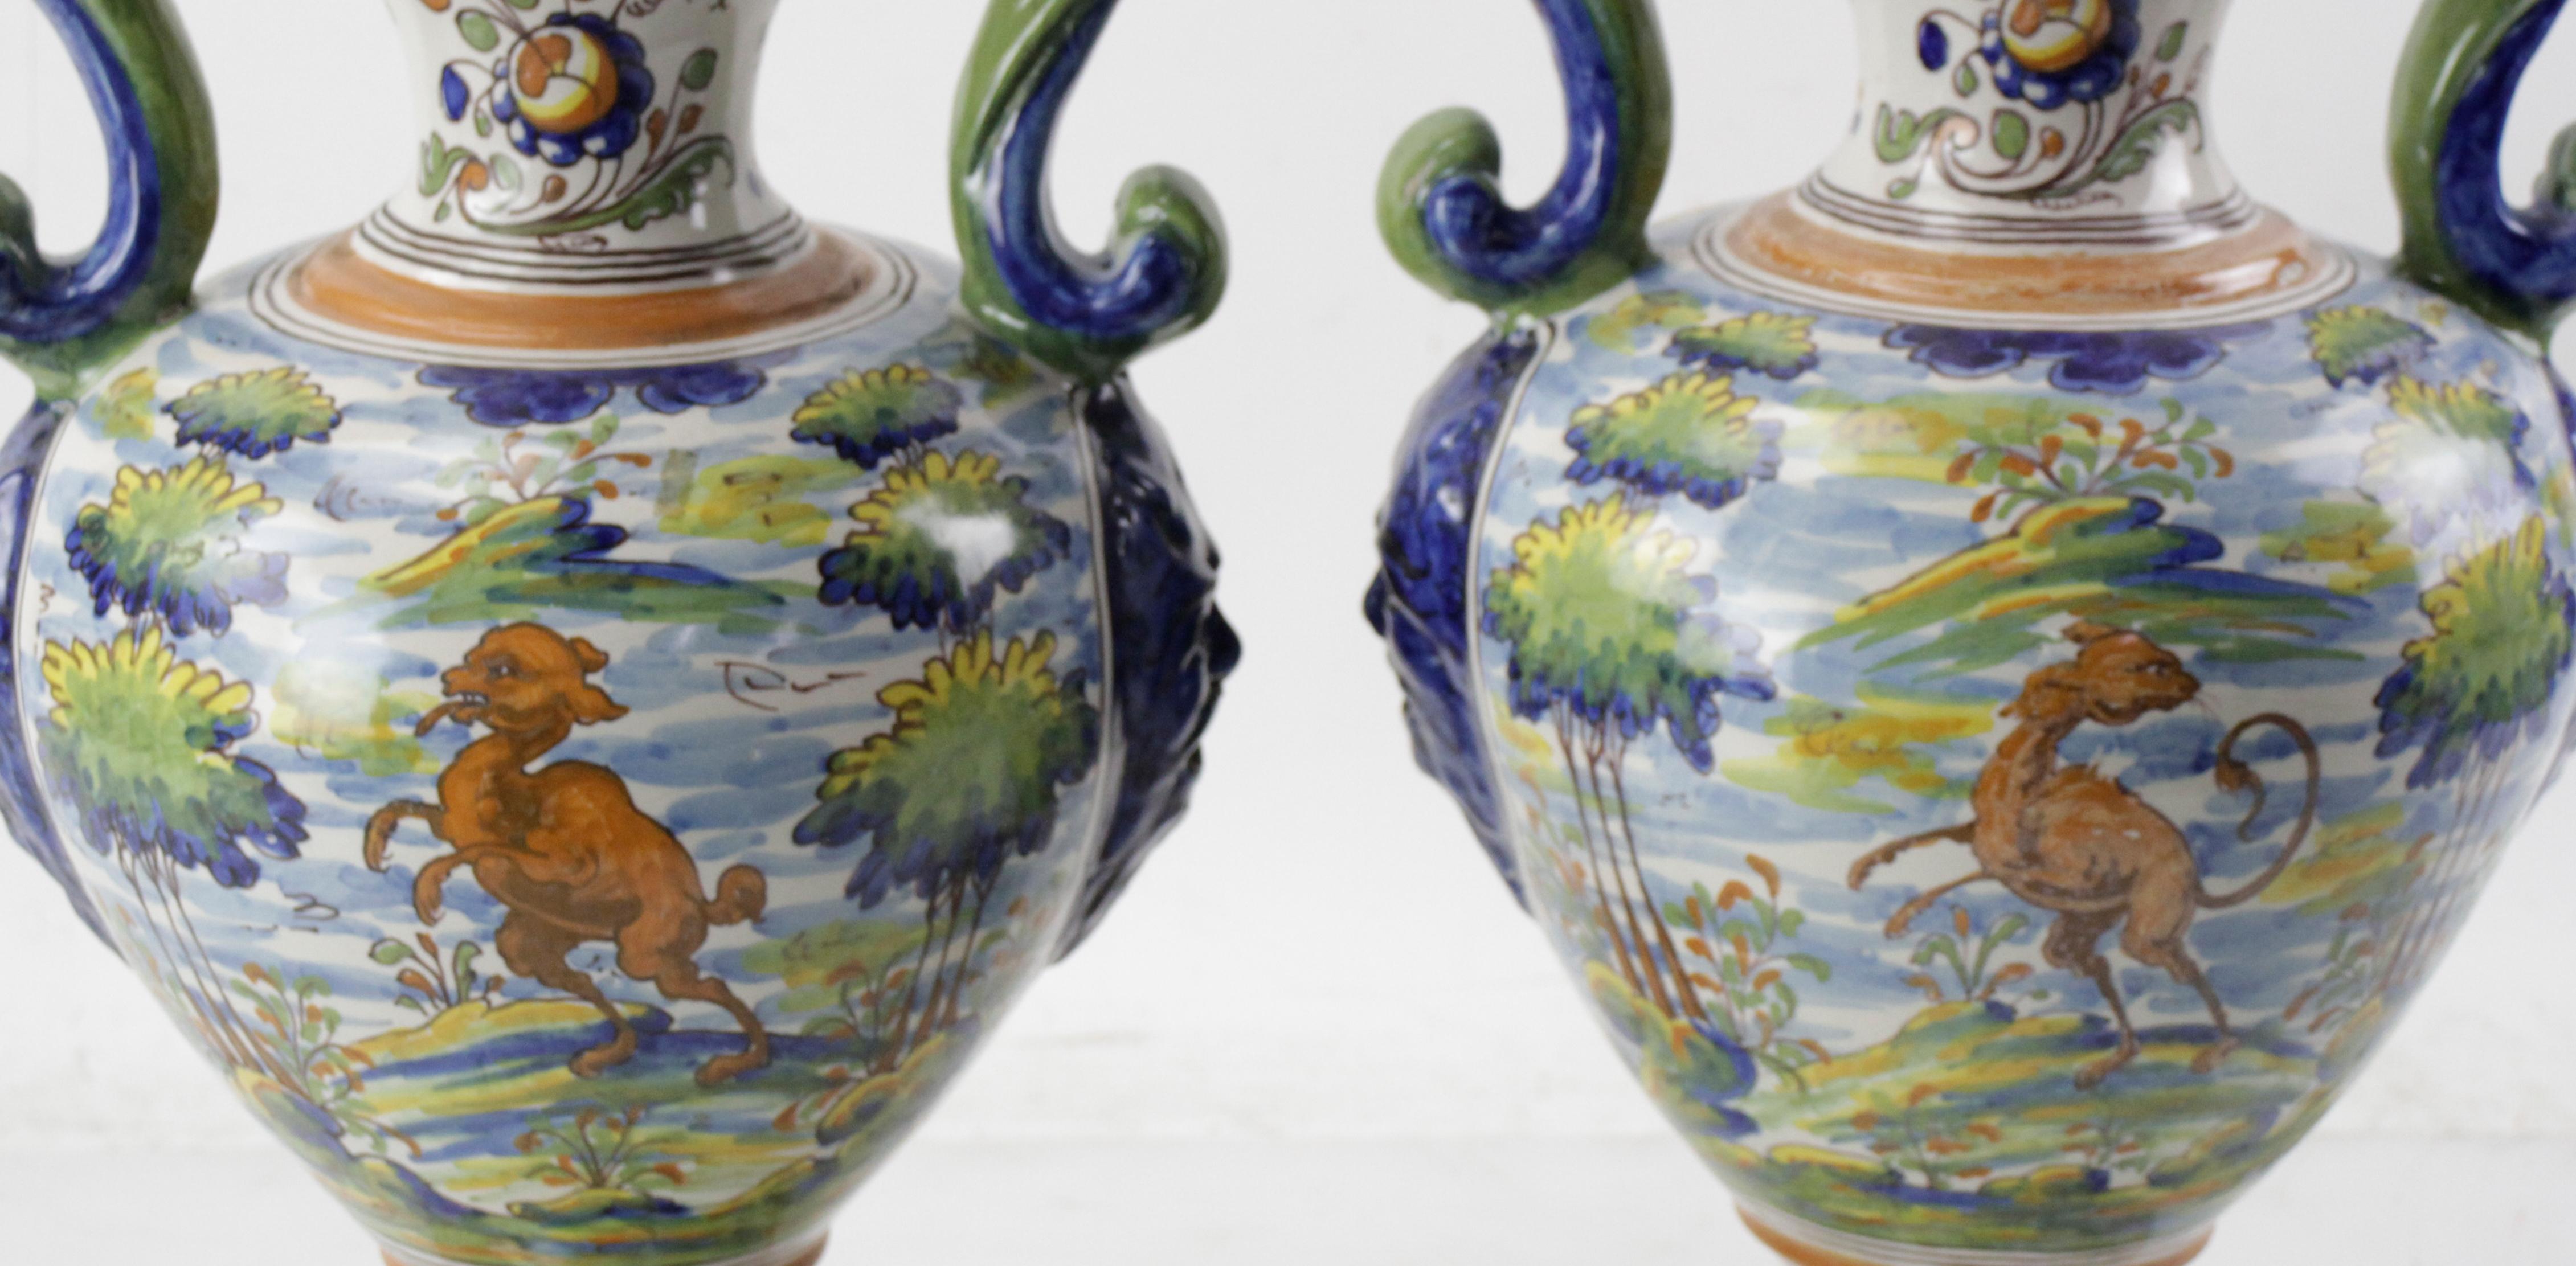 Pair of Antique Italian Majolica Italian Blue and Green Two Handled Urns  For Sale 2